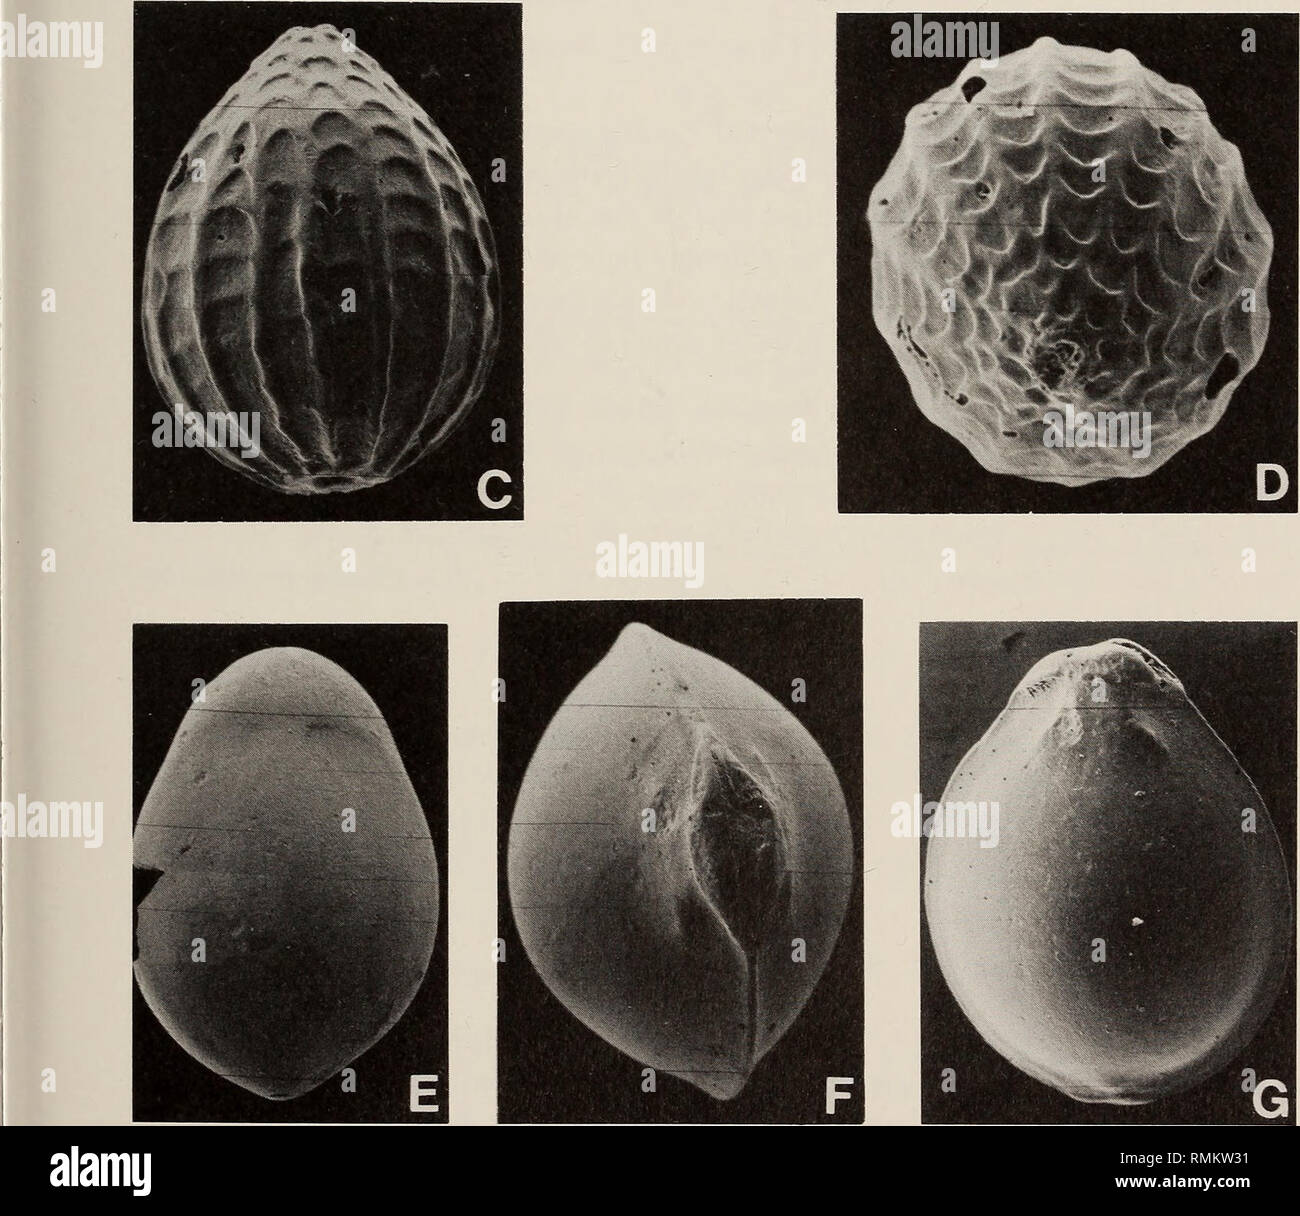 . Annals of the South African Museum = Annale van die Suid-Afrikaanse Museum. Natural history. Fig. 8. A-B. Oolina sp. A. A. Apertural view, CTC 4. x 156. B. Apertural view, same specimen as Figure 7H. x 173. C-D. Oolina squamososulcata (Heron-Allen &amp; Earland). C. Side view, CTC 4. x 206. D. Apertural view, same specimen, x 246. E. Fissurina lucida (Williamson). Side view, CTC 3. x 327. F-G. Fissurina cf. F. marginata (Walker &amp; Boys). F. Apertural view, CTC 3. x 204 G. Side view, same specimen, x 161.. Please note that these images are extracted from scanned page images that may have b Stock Photo